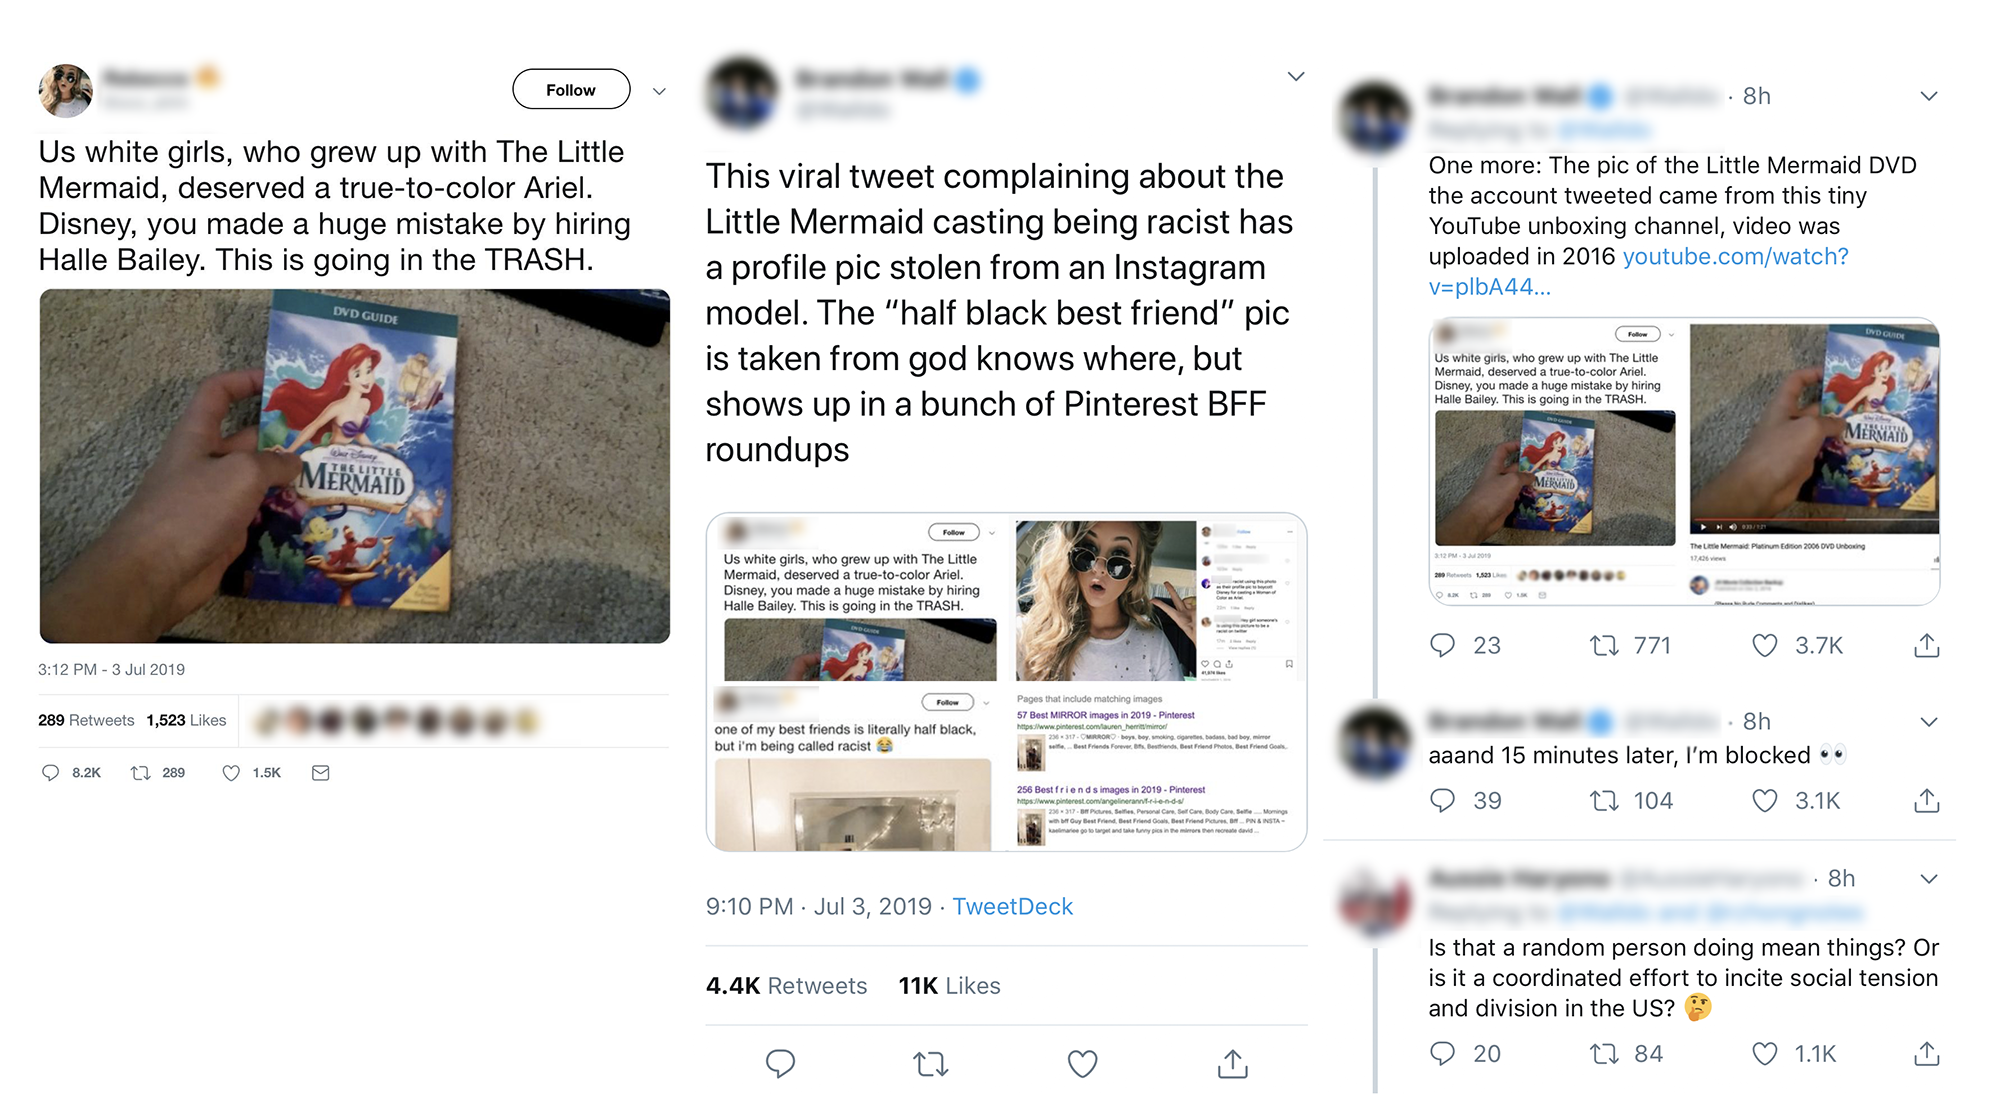 quit your bullshit - Us white girls, who grew up with The Little Mermaid, deserved a truetocolor Ariel. Disney, you made a huge mistake by hiring Halle Bailey. This is going in the Trash. One more The pic of the Little Mermaid Dvd the account tweeted came